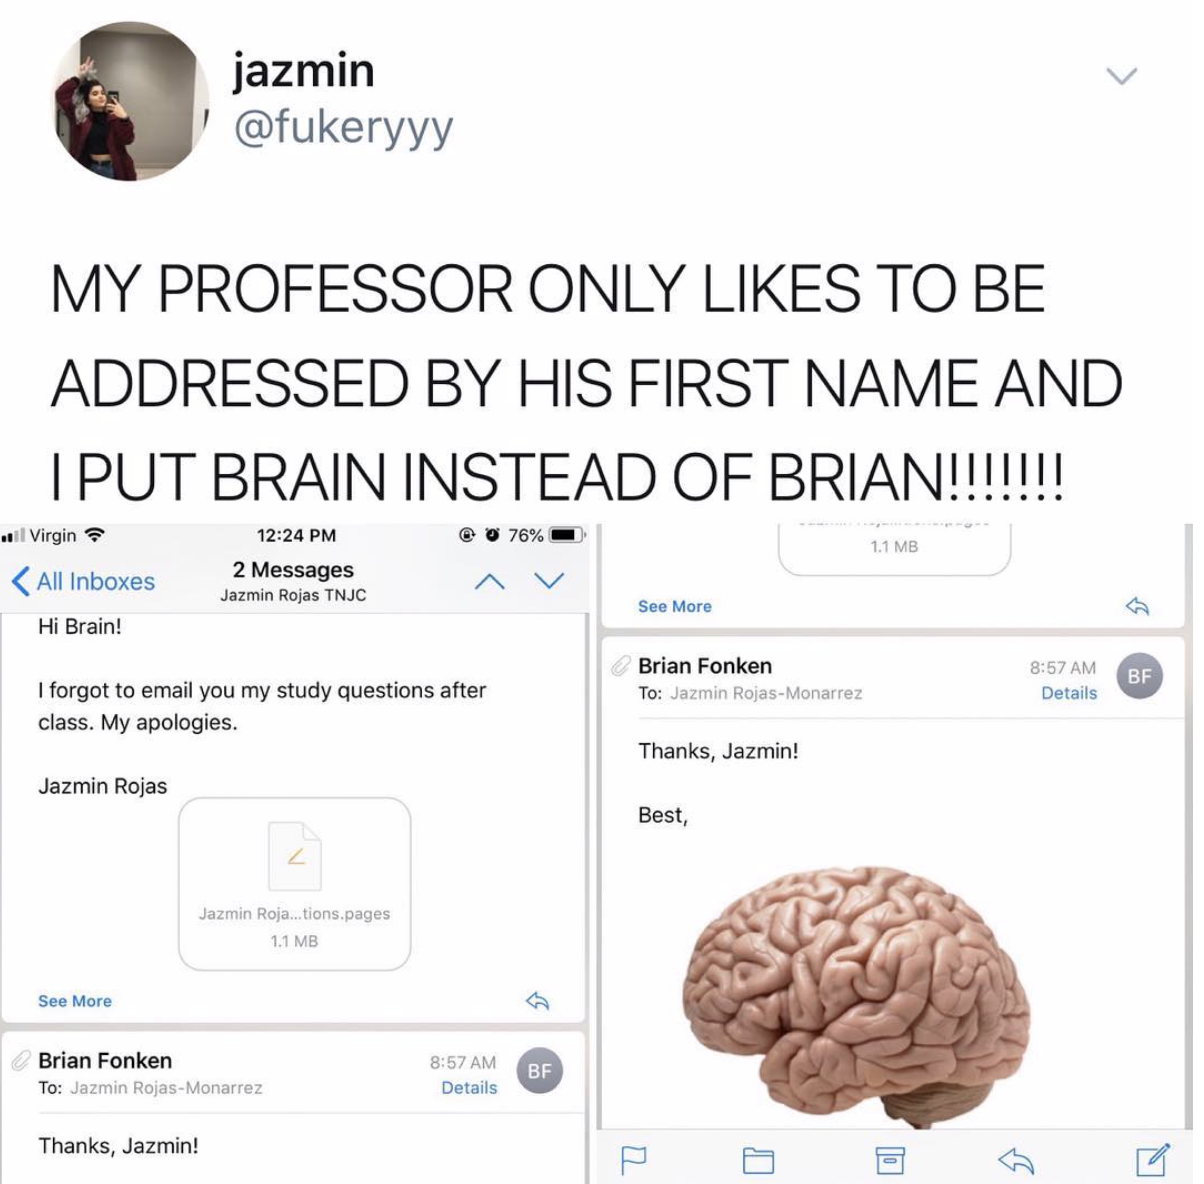 memes - brian fonken - jazmin My Professor Only To Be Addressed By His First Name And I Put Brain Instead Of Brian!!!!!!! Ou 78% Virgin All Inboxes ve Hi Brain! 2 Messages Jarmin R Tnjc Tan Brian Fonken To Man I forgot to email you my study questions afte